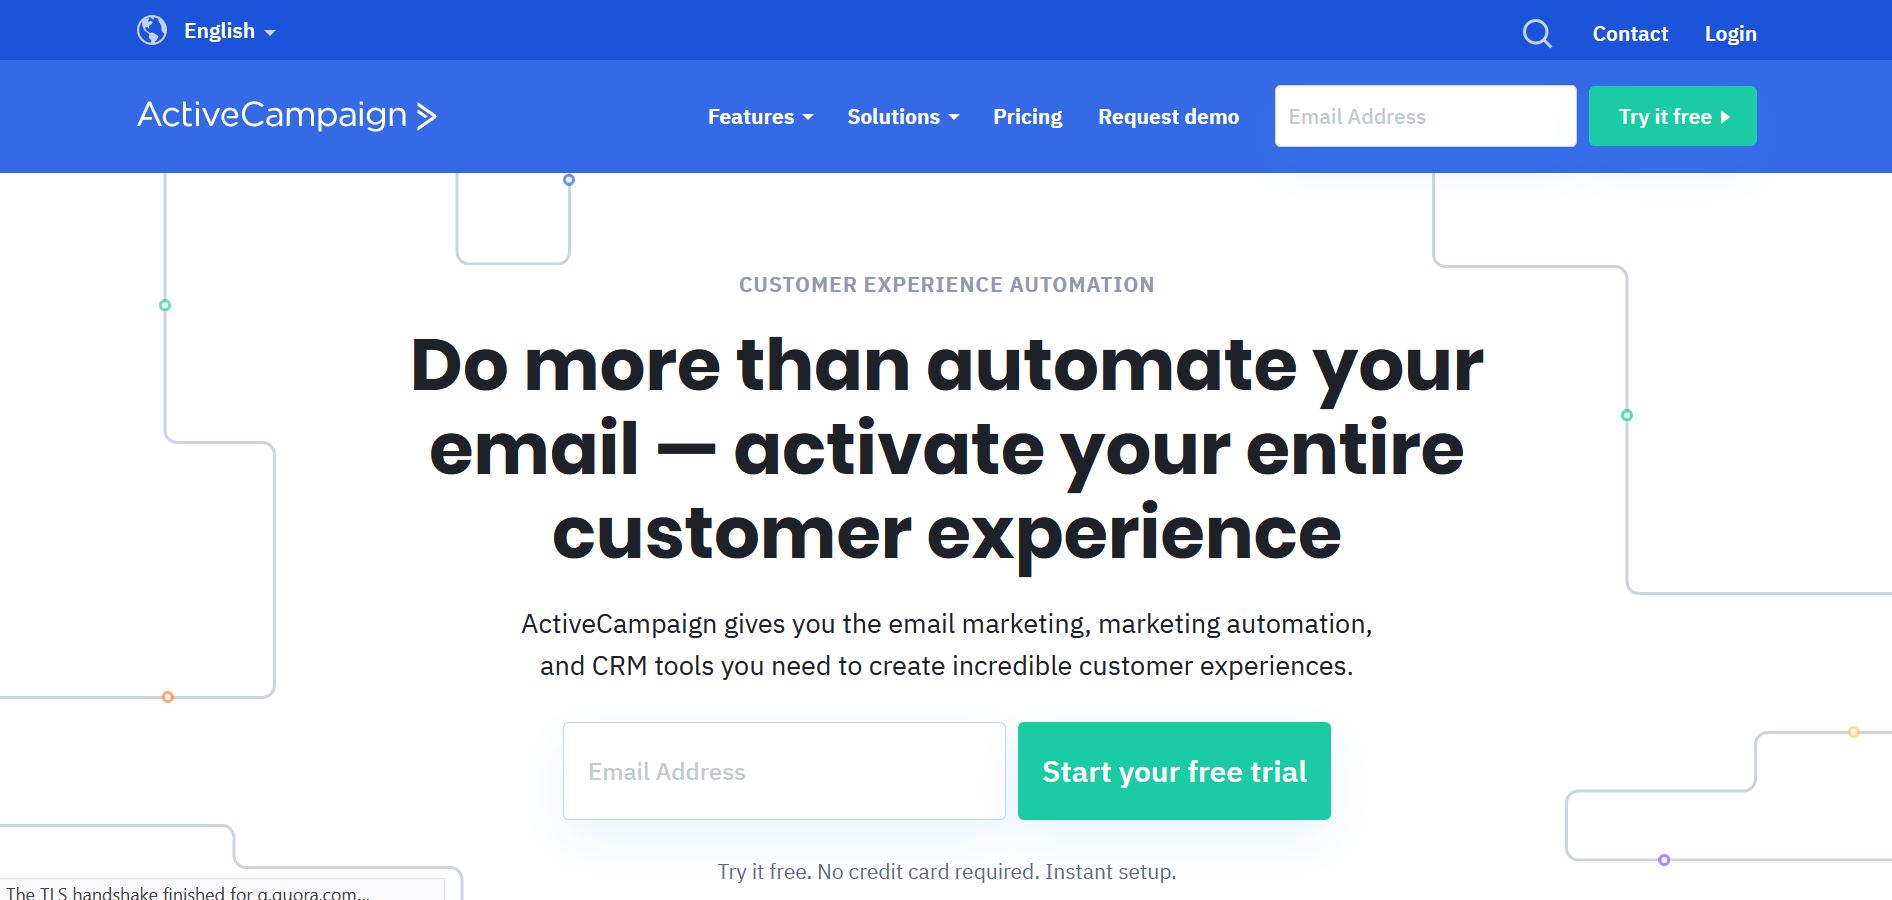 email marketing software for startups